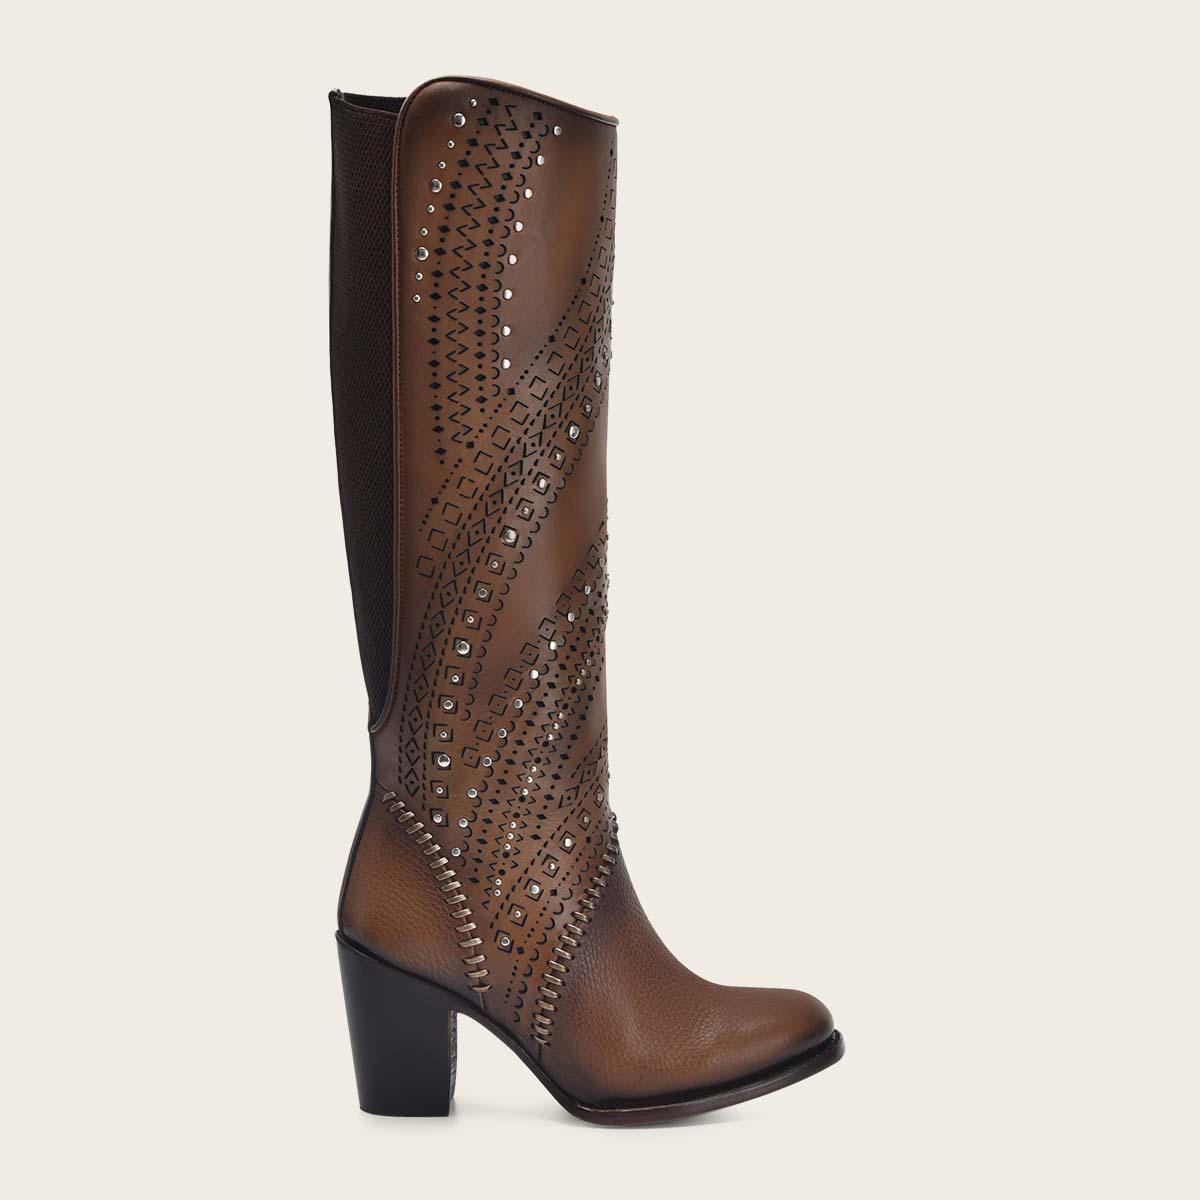 Decorated brown leather tall boot with perforations - 3W21RS - Cuadra Shop